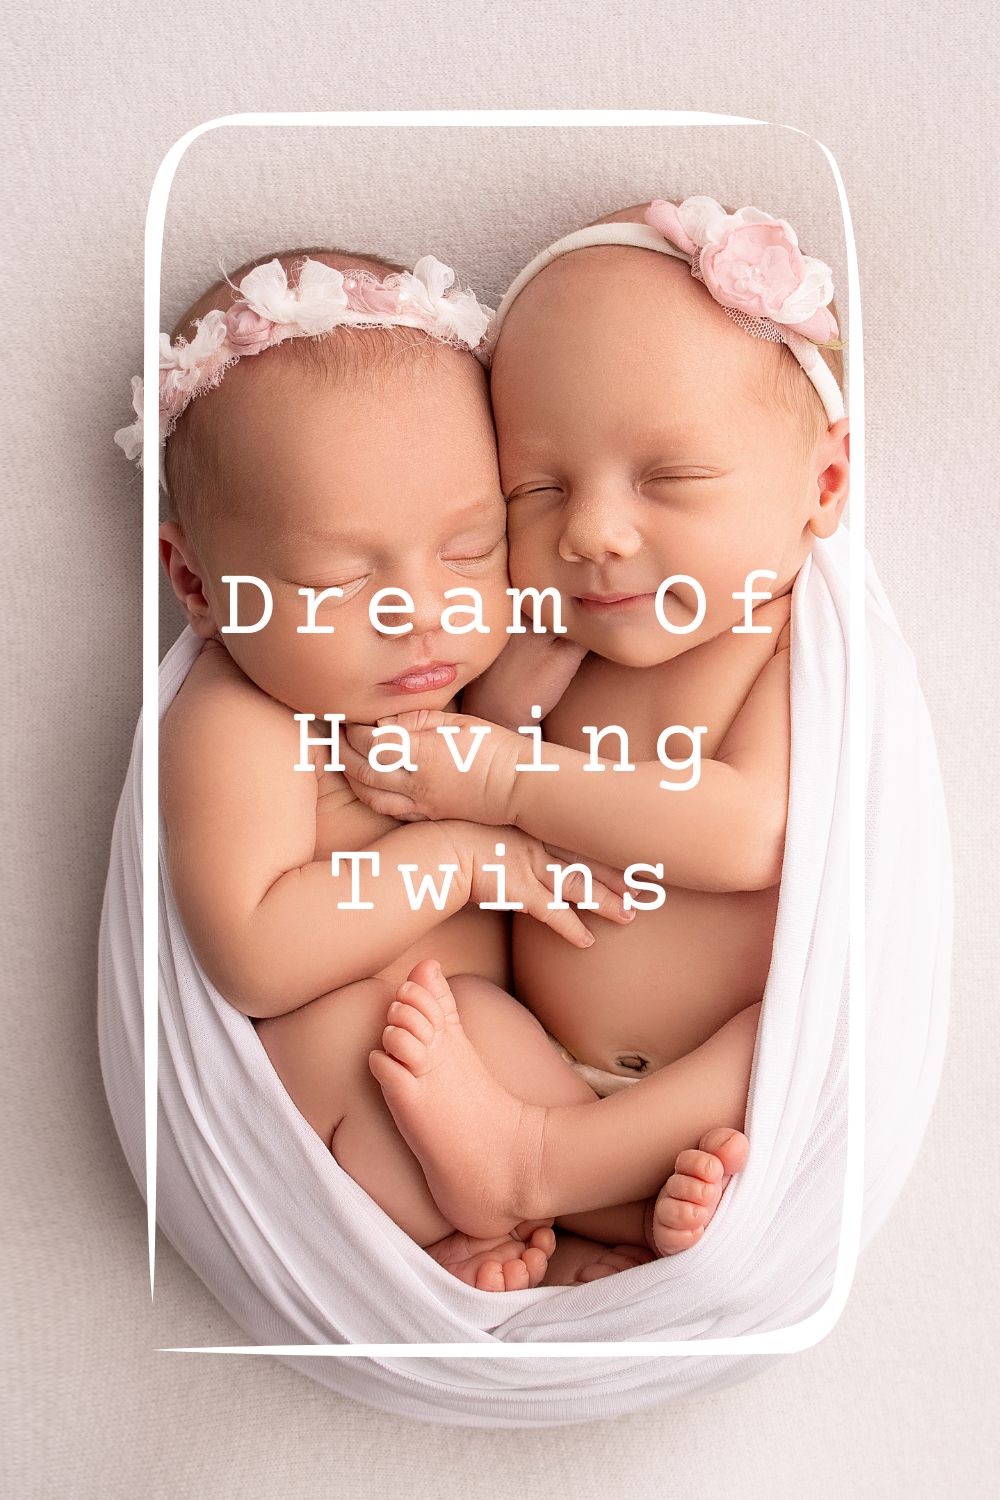 Dream Of Having Twins Meanings 2